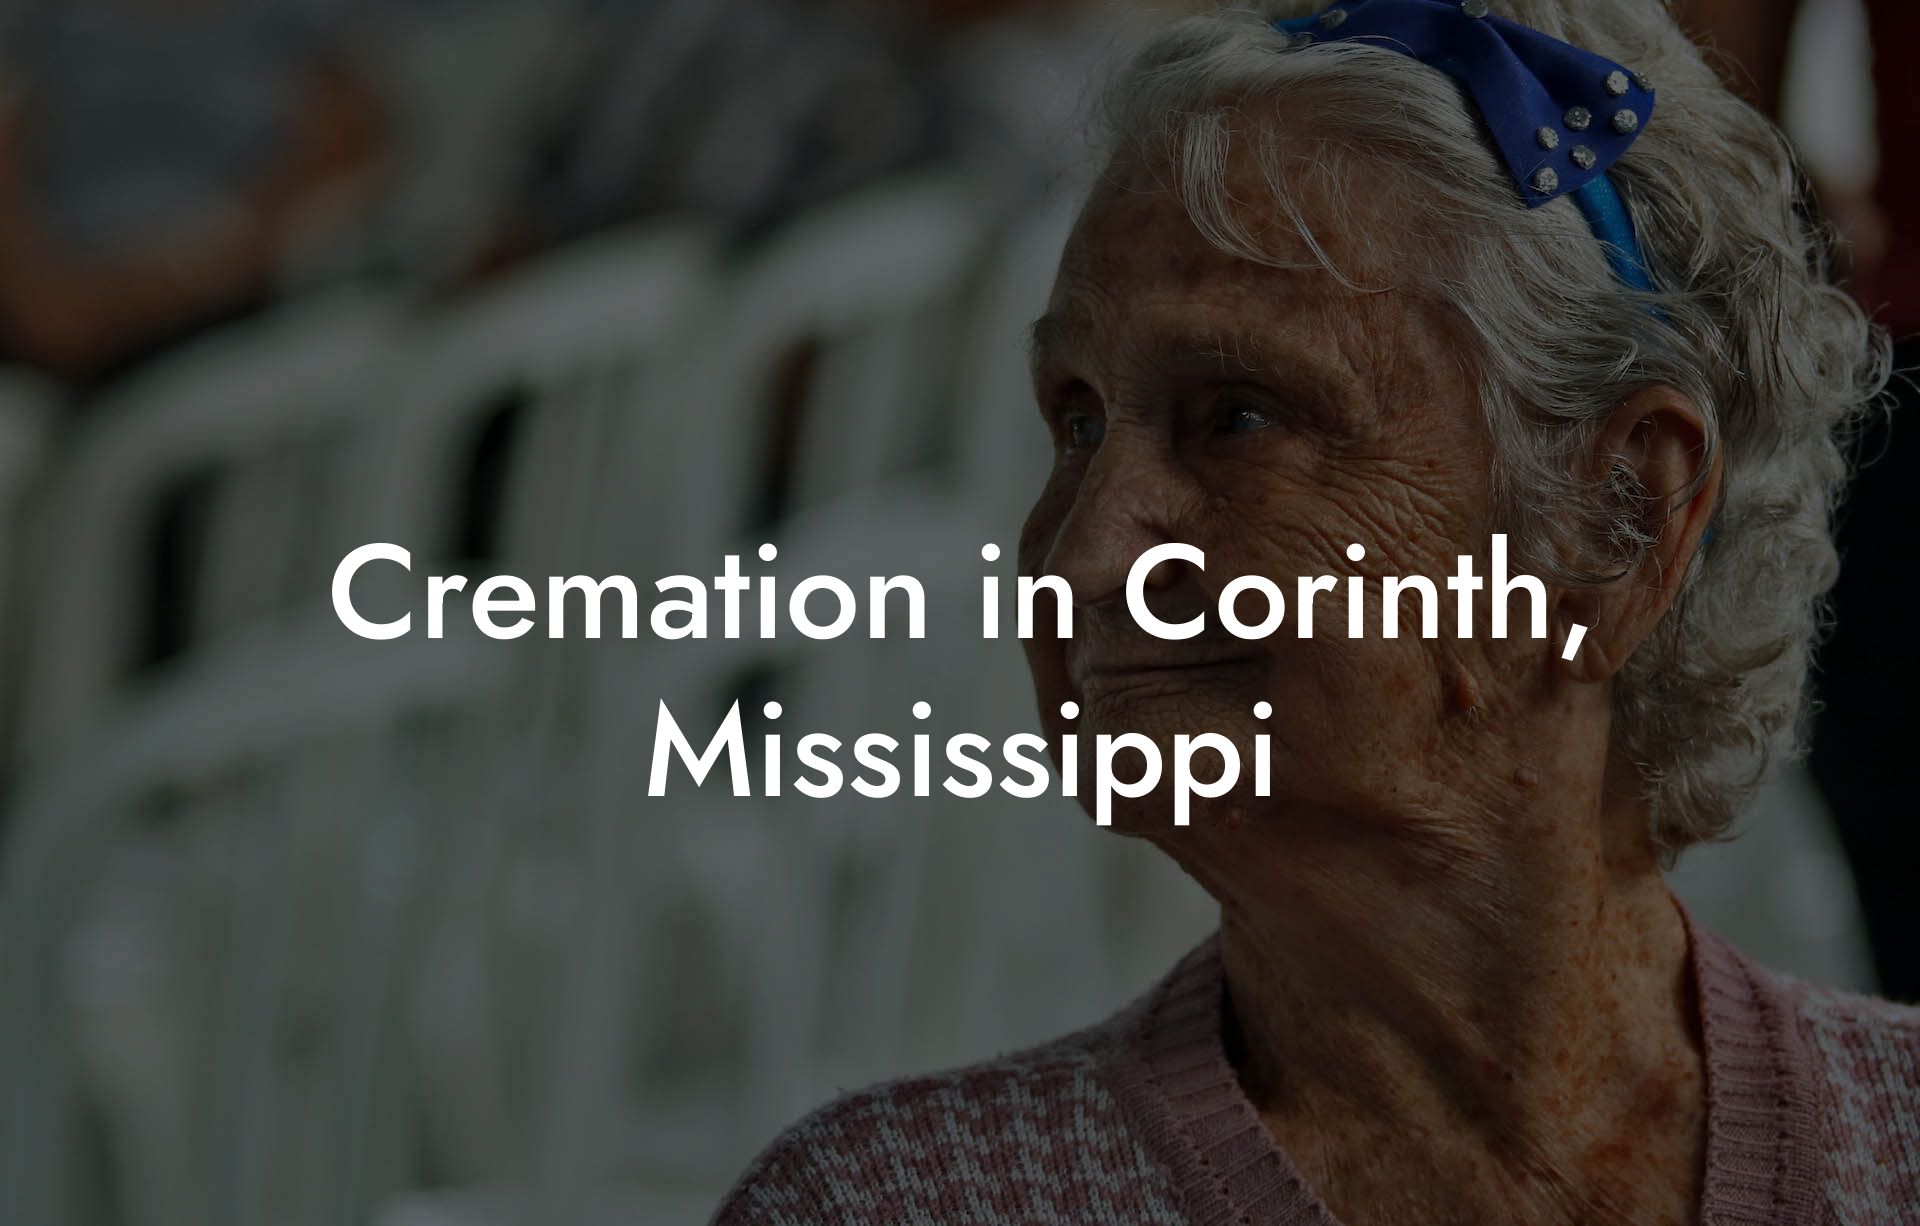 Cremation in Corinth, Mississippi